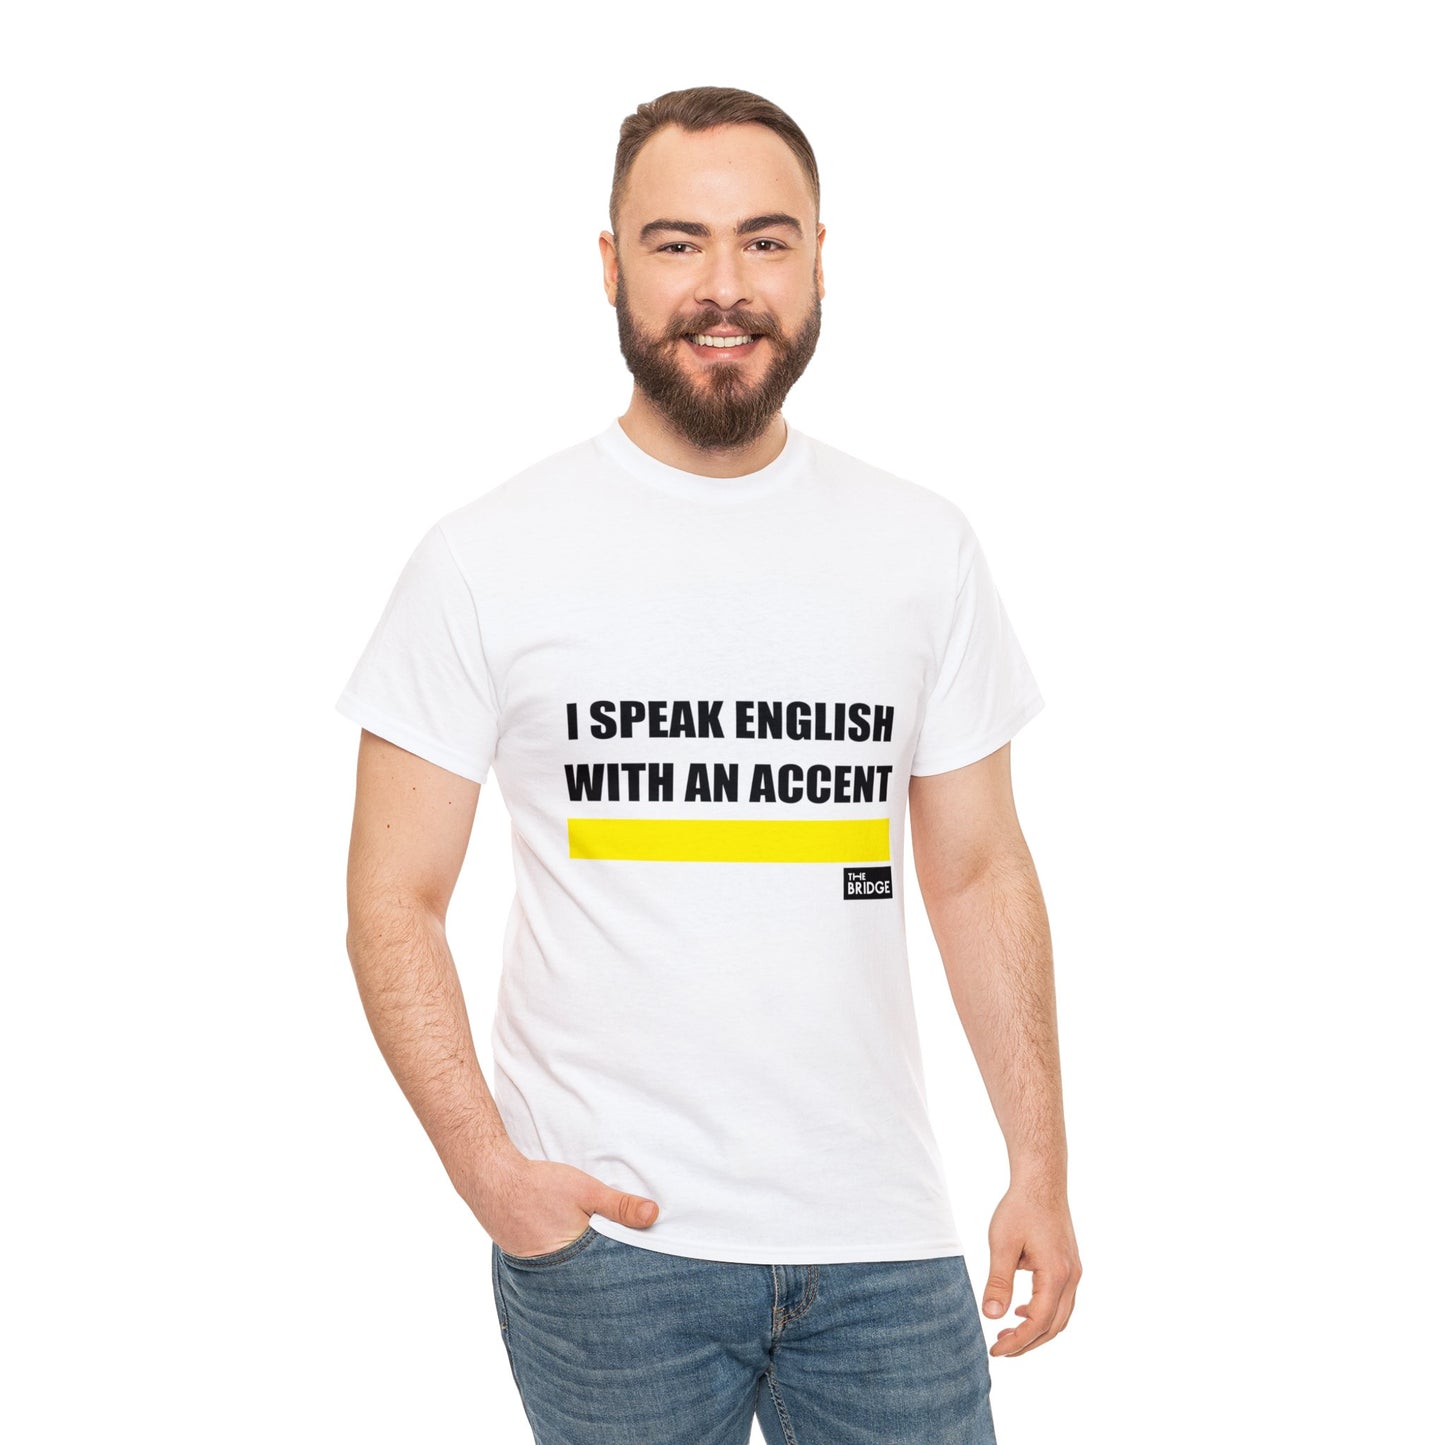 I SPEAK ENGLISH WITH AN ACCENT - WHITE T-SHIRT